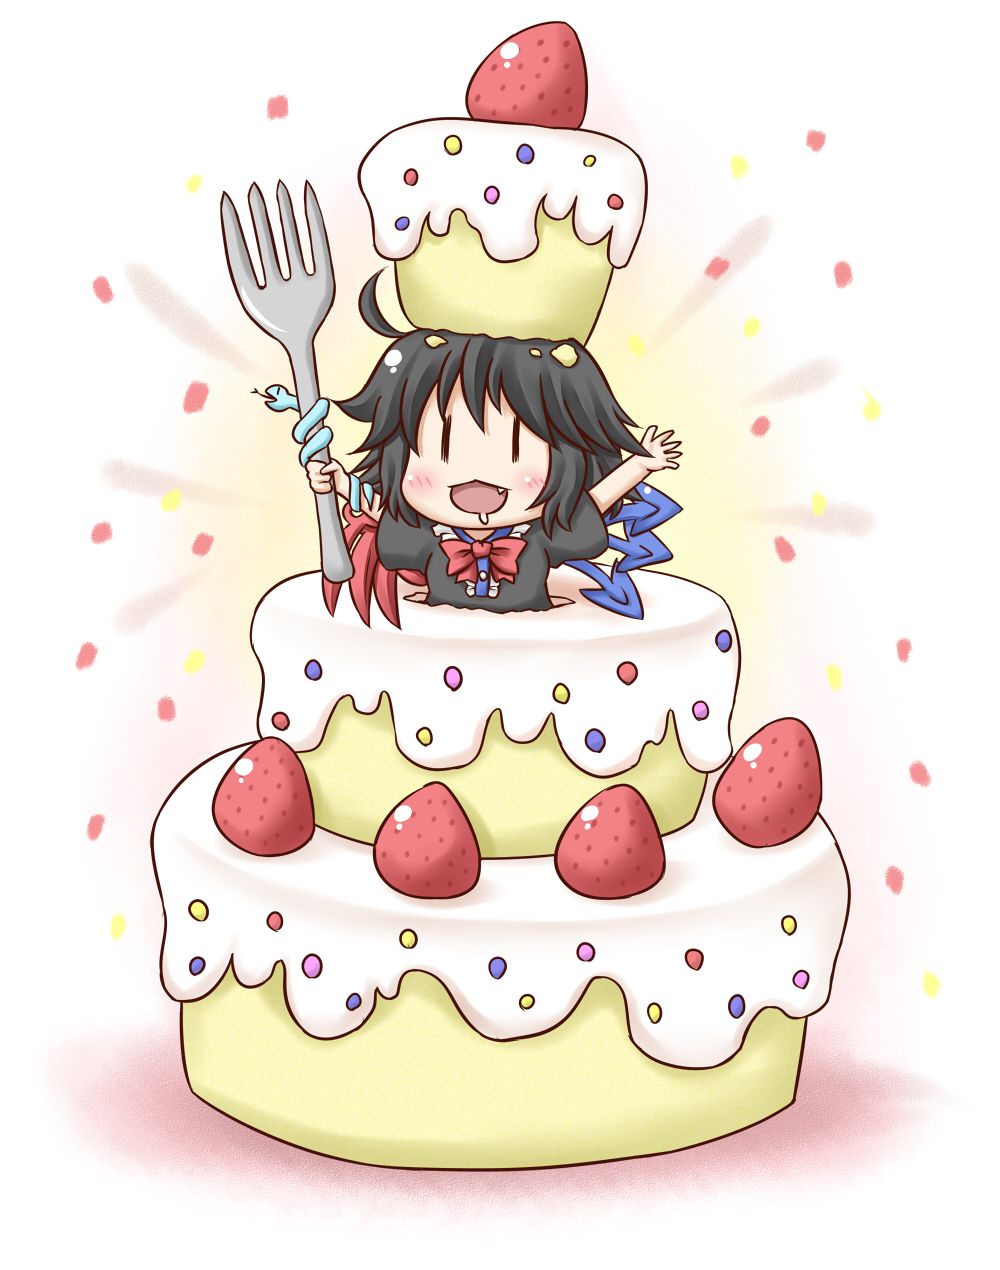 Anime Cake Wallpapers - Wallpaper Cave